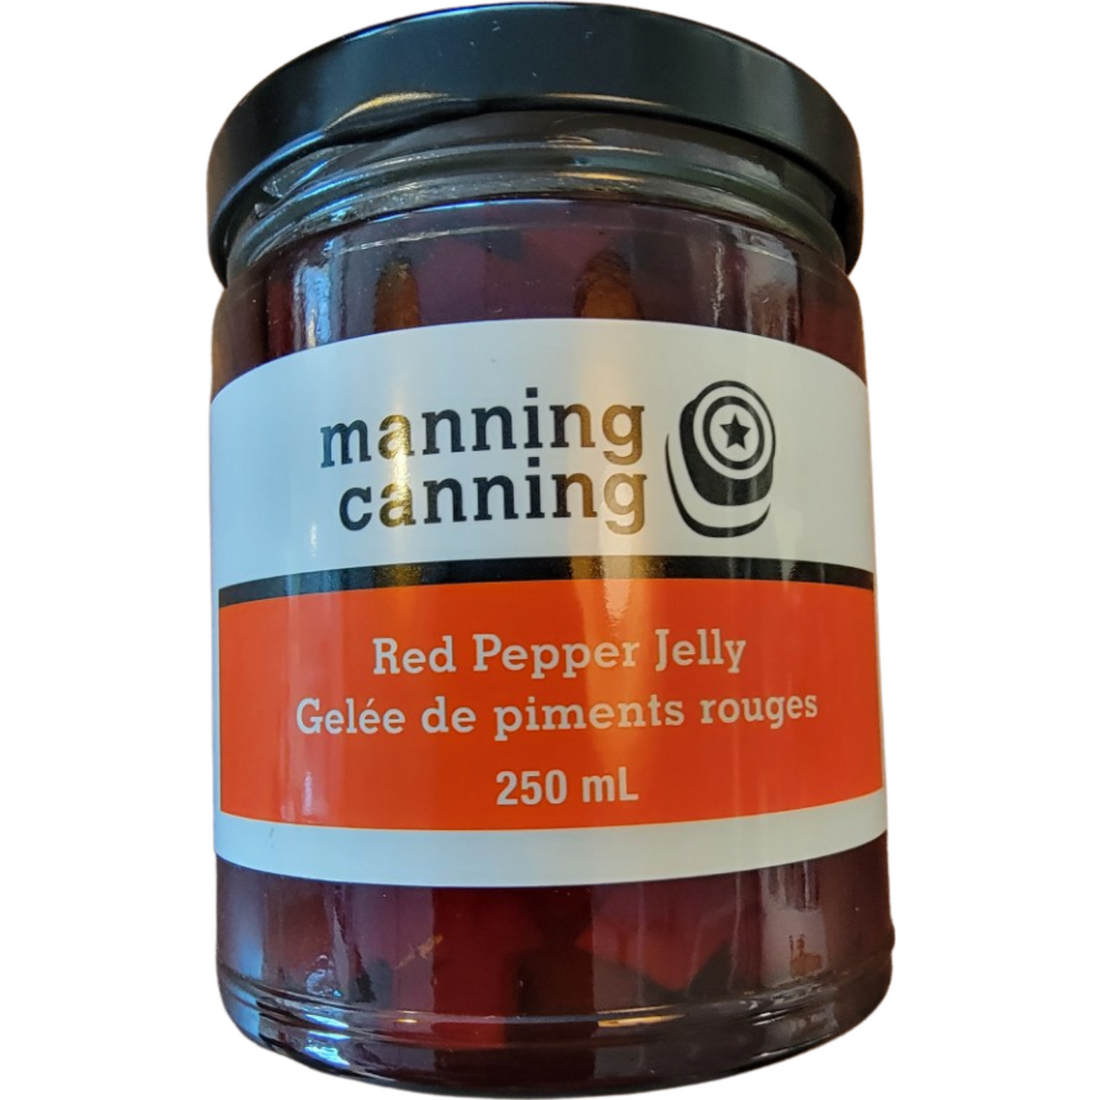 Red Pepper Jelly - Manning Canning